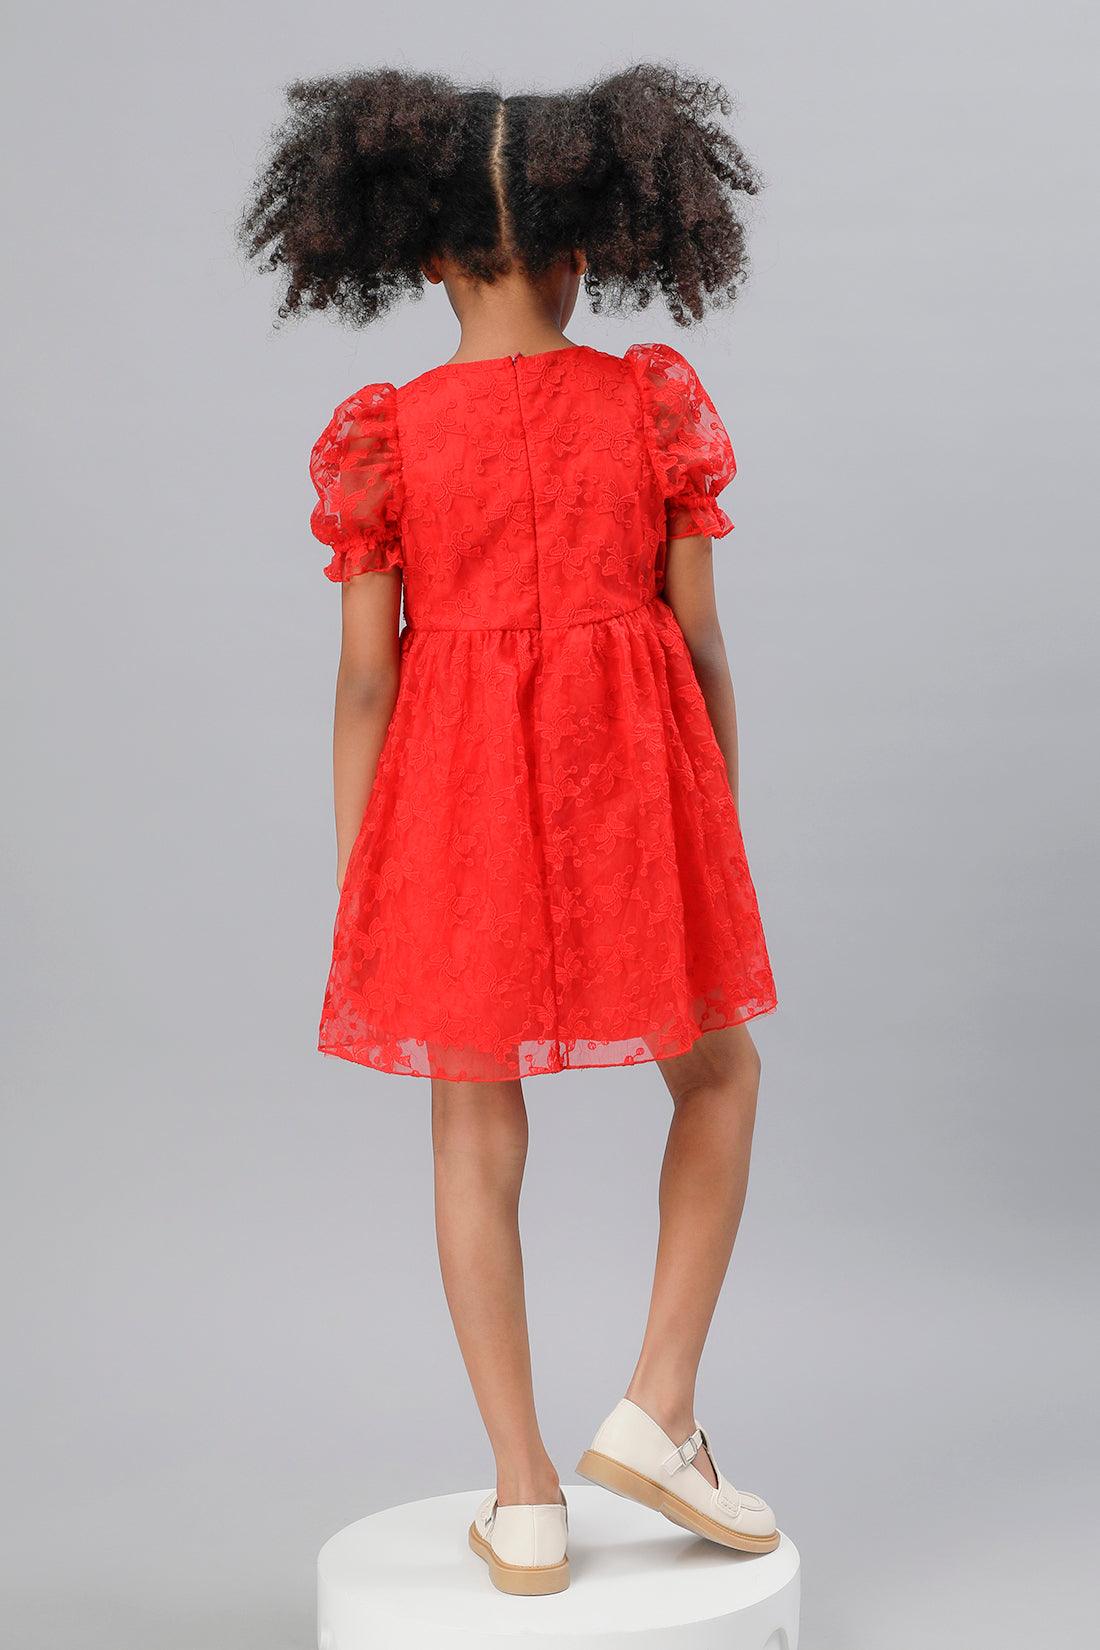 One Friday Girls Cherry Red Laced Dress